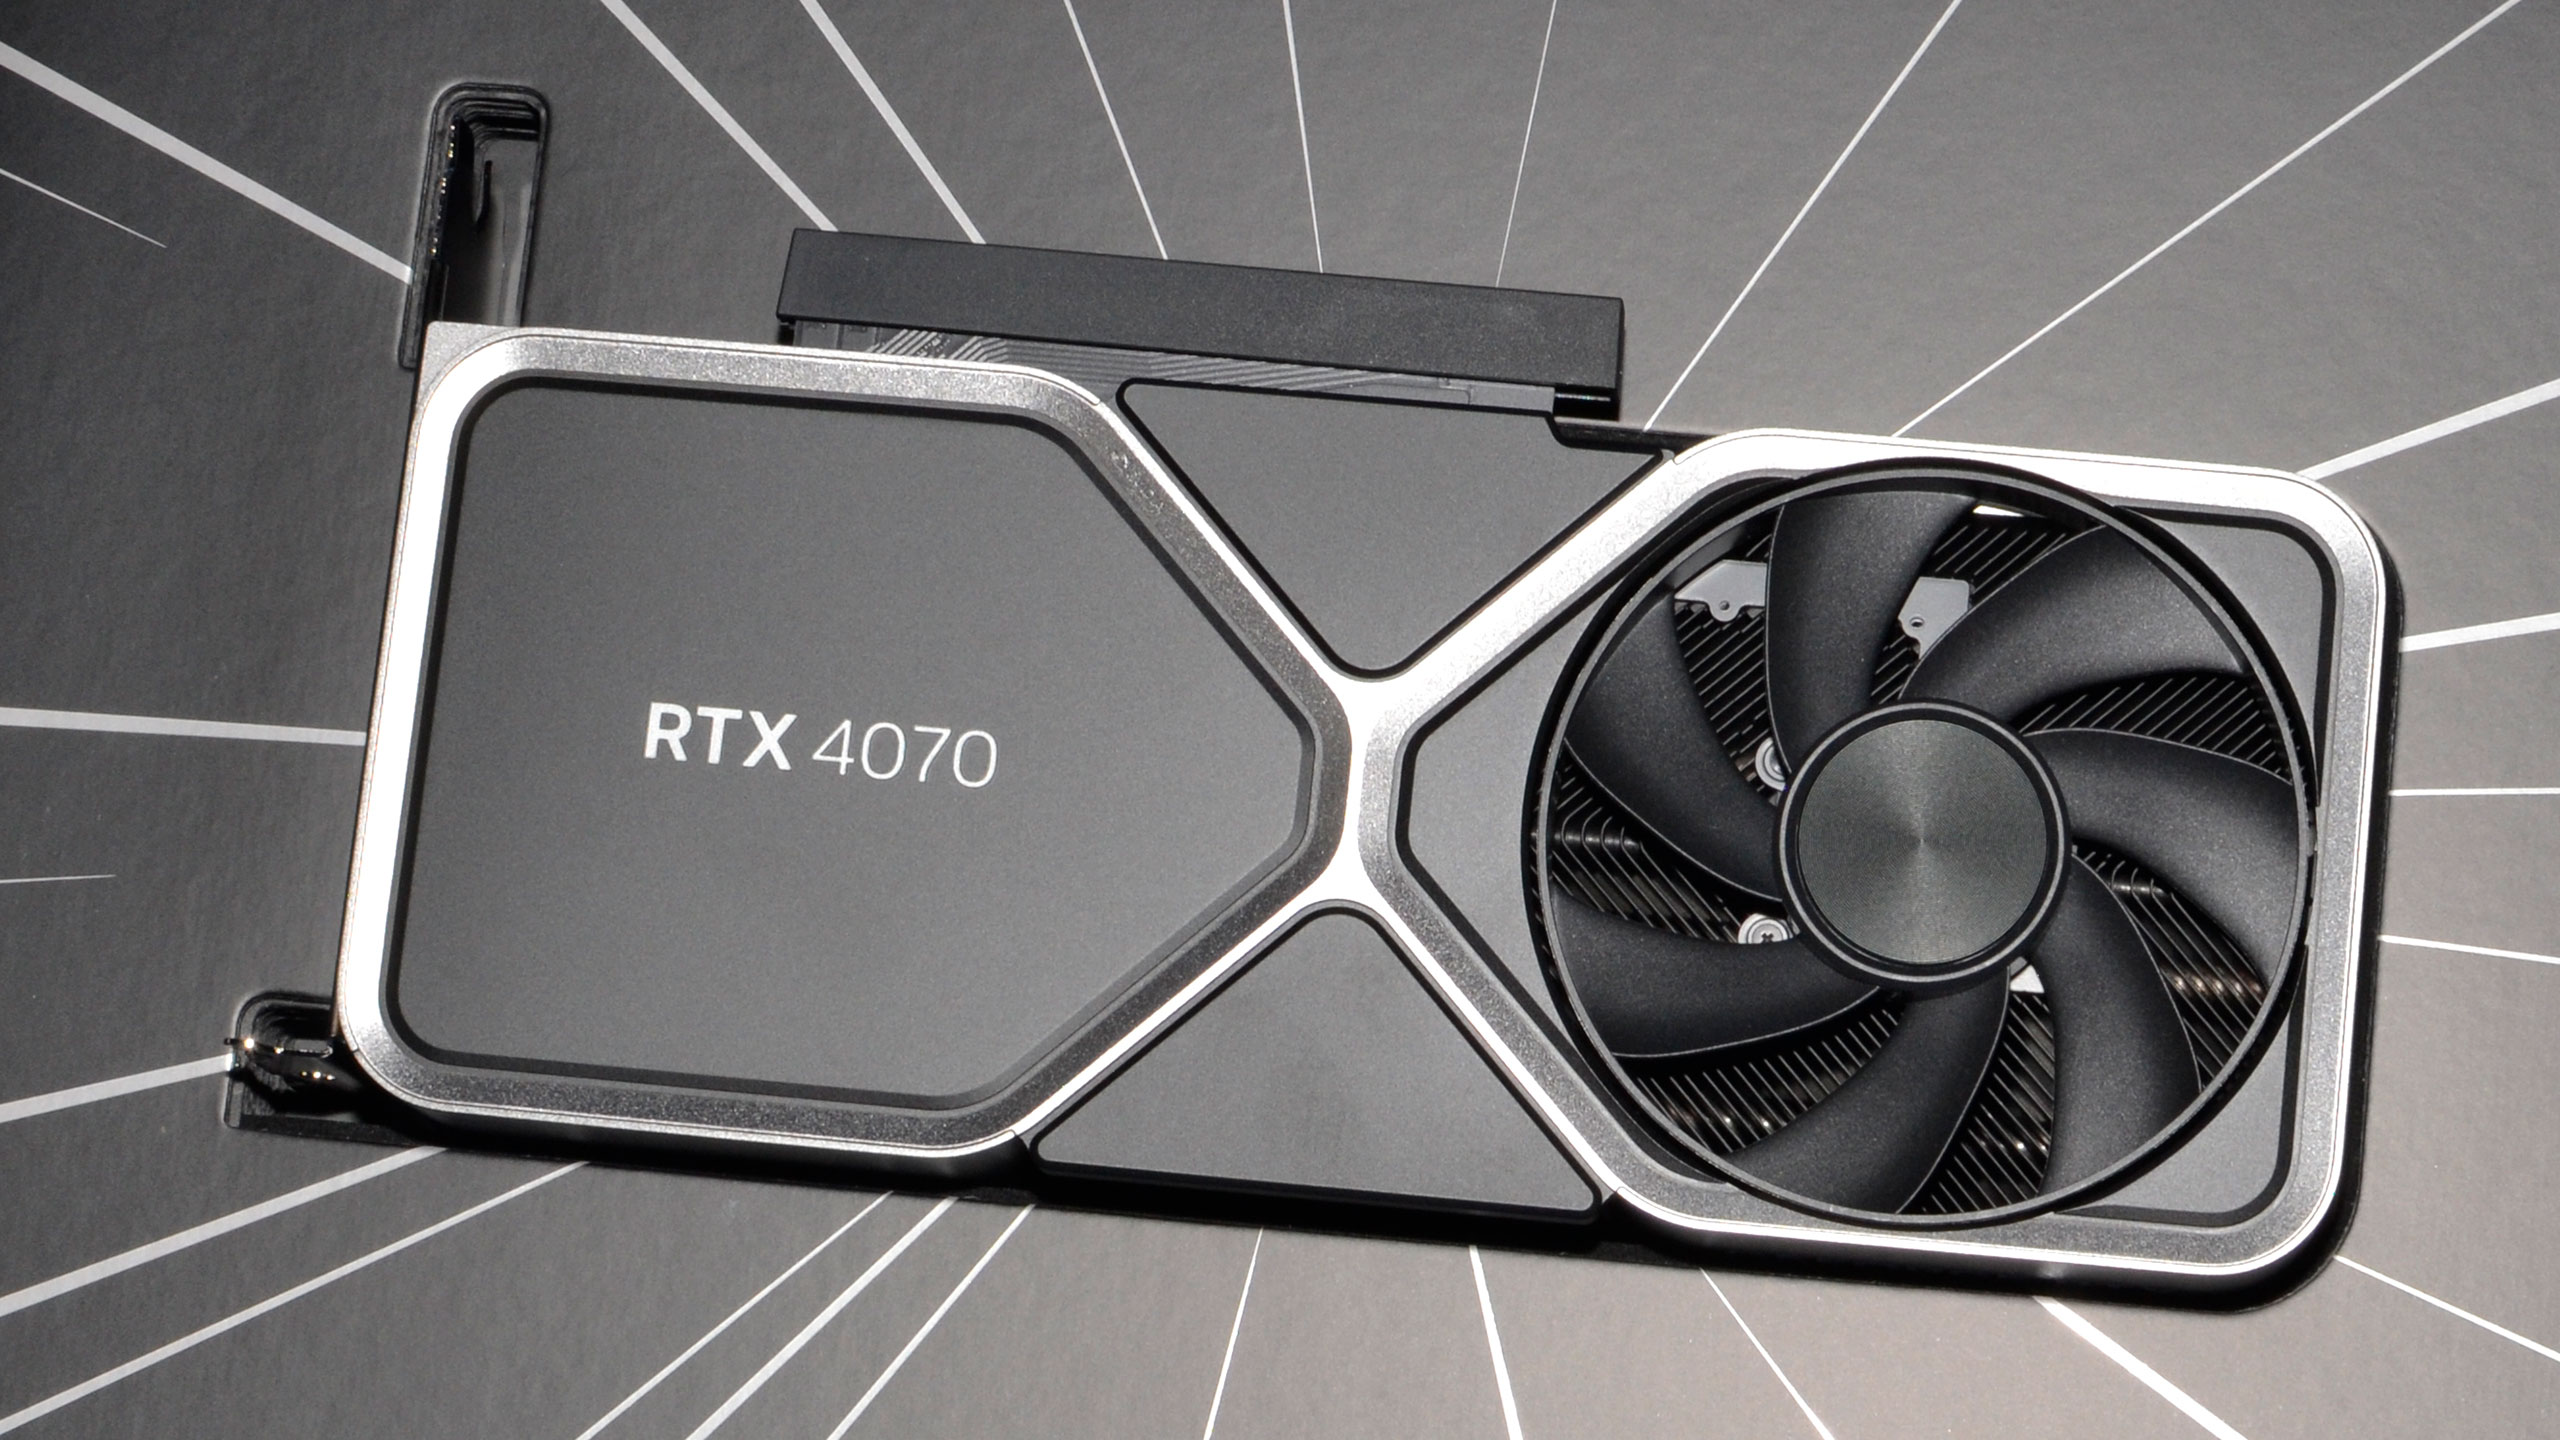 AMD Radeon RX 6800 Vs. Nvidia RTX 3070: What's The Best $500 Graphics Card?